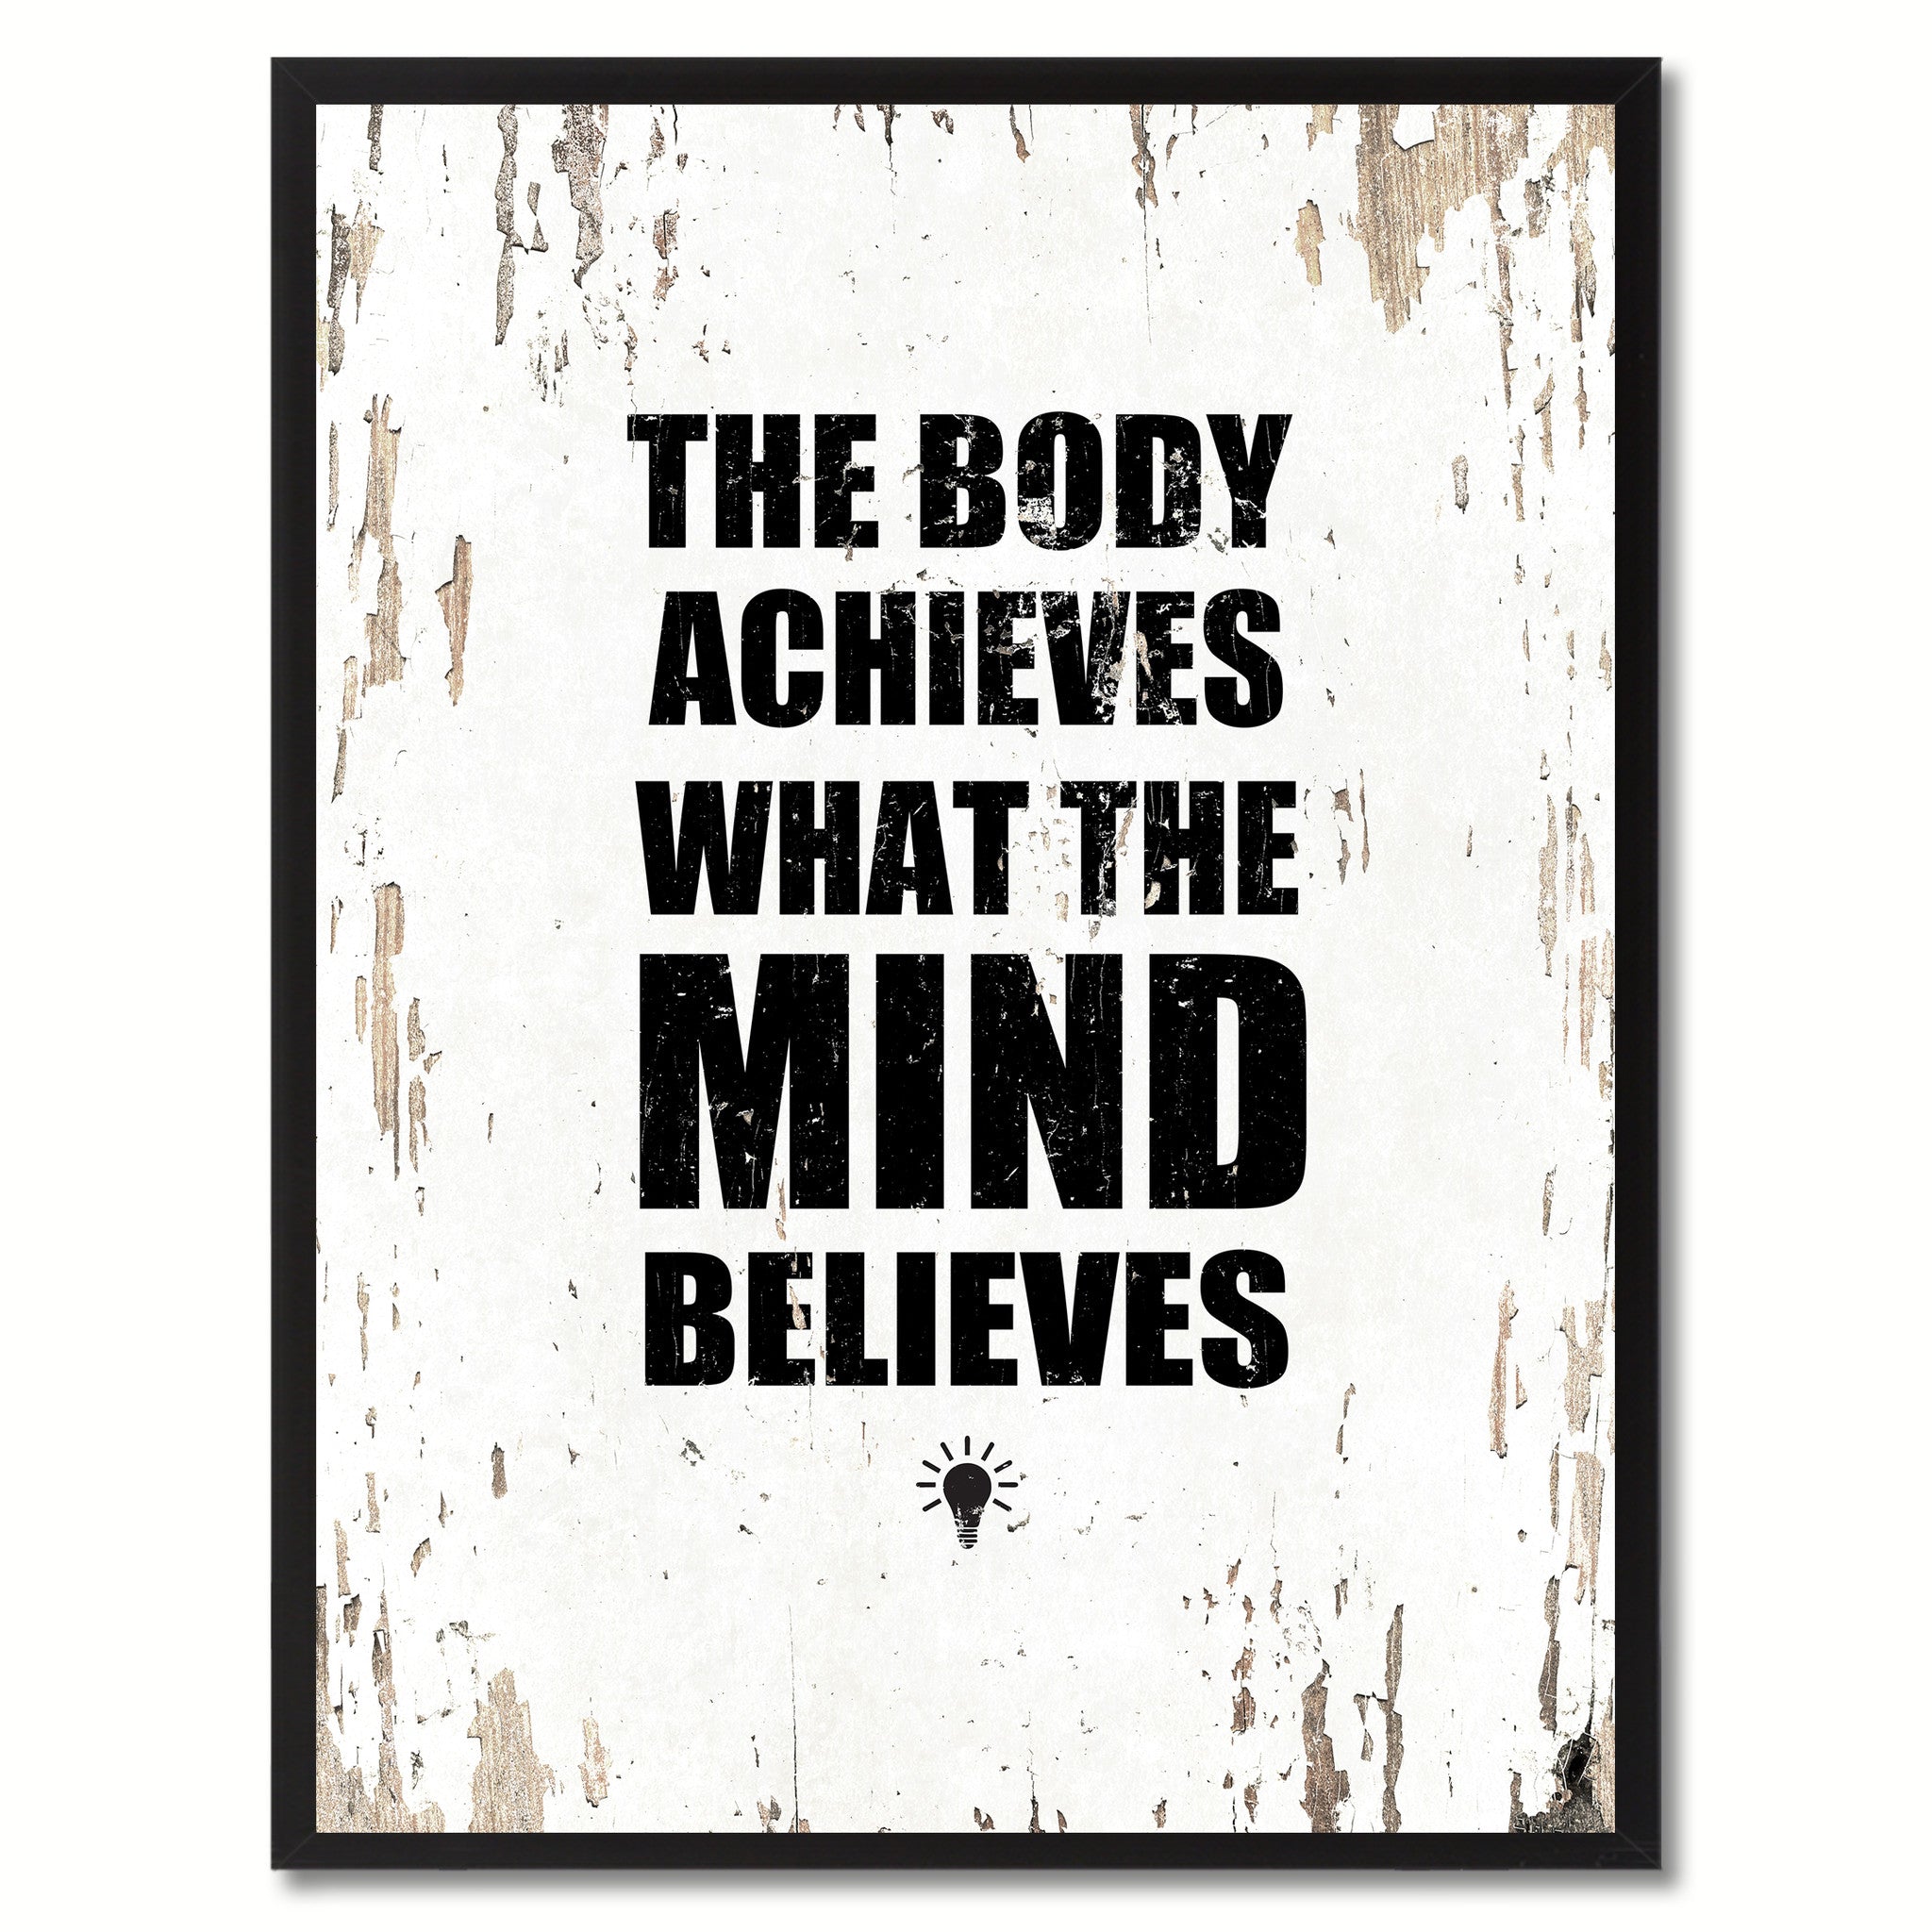 The Body Achieves What The Mind Believes Saying Canvas Print, Black Picture Frame Home Decor Wall Art Gifts